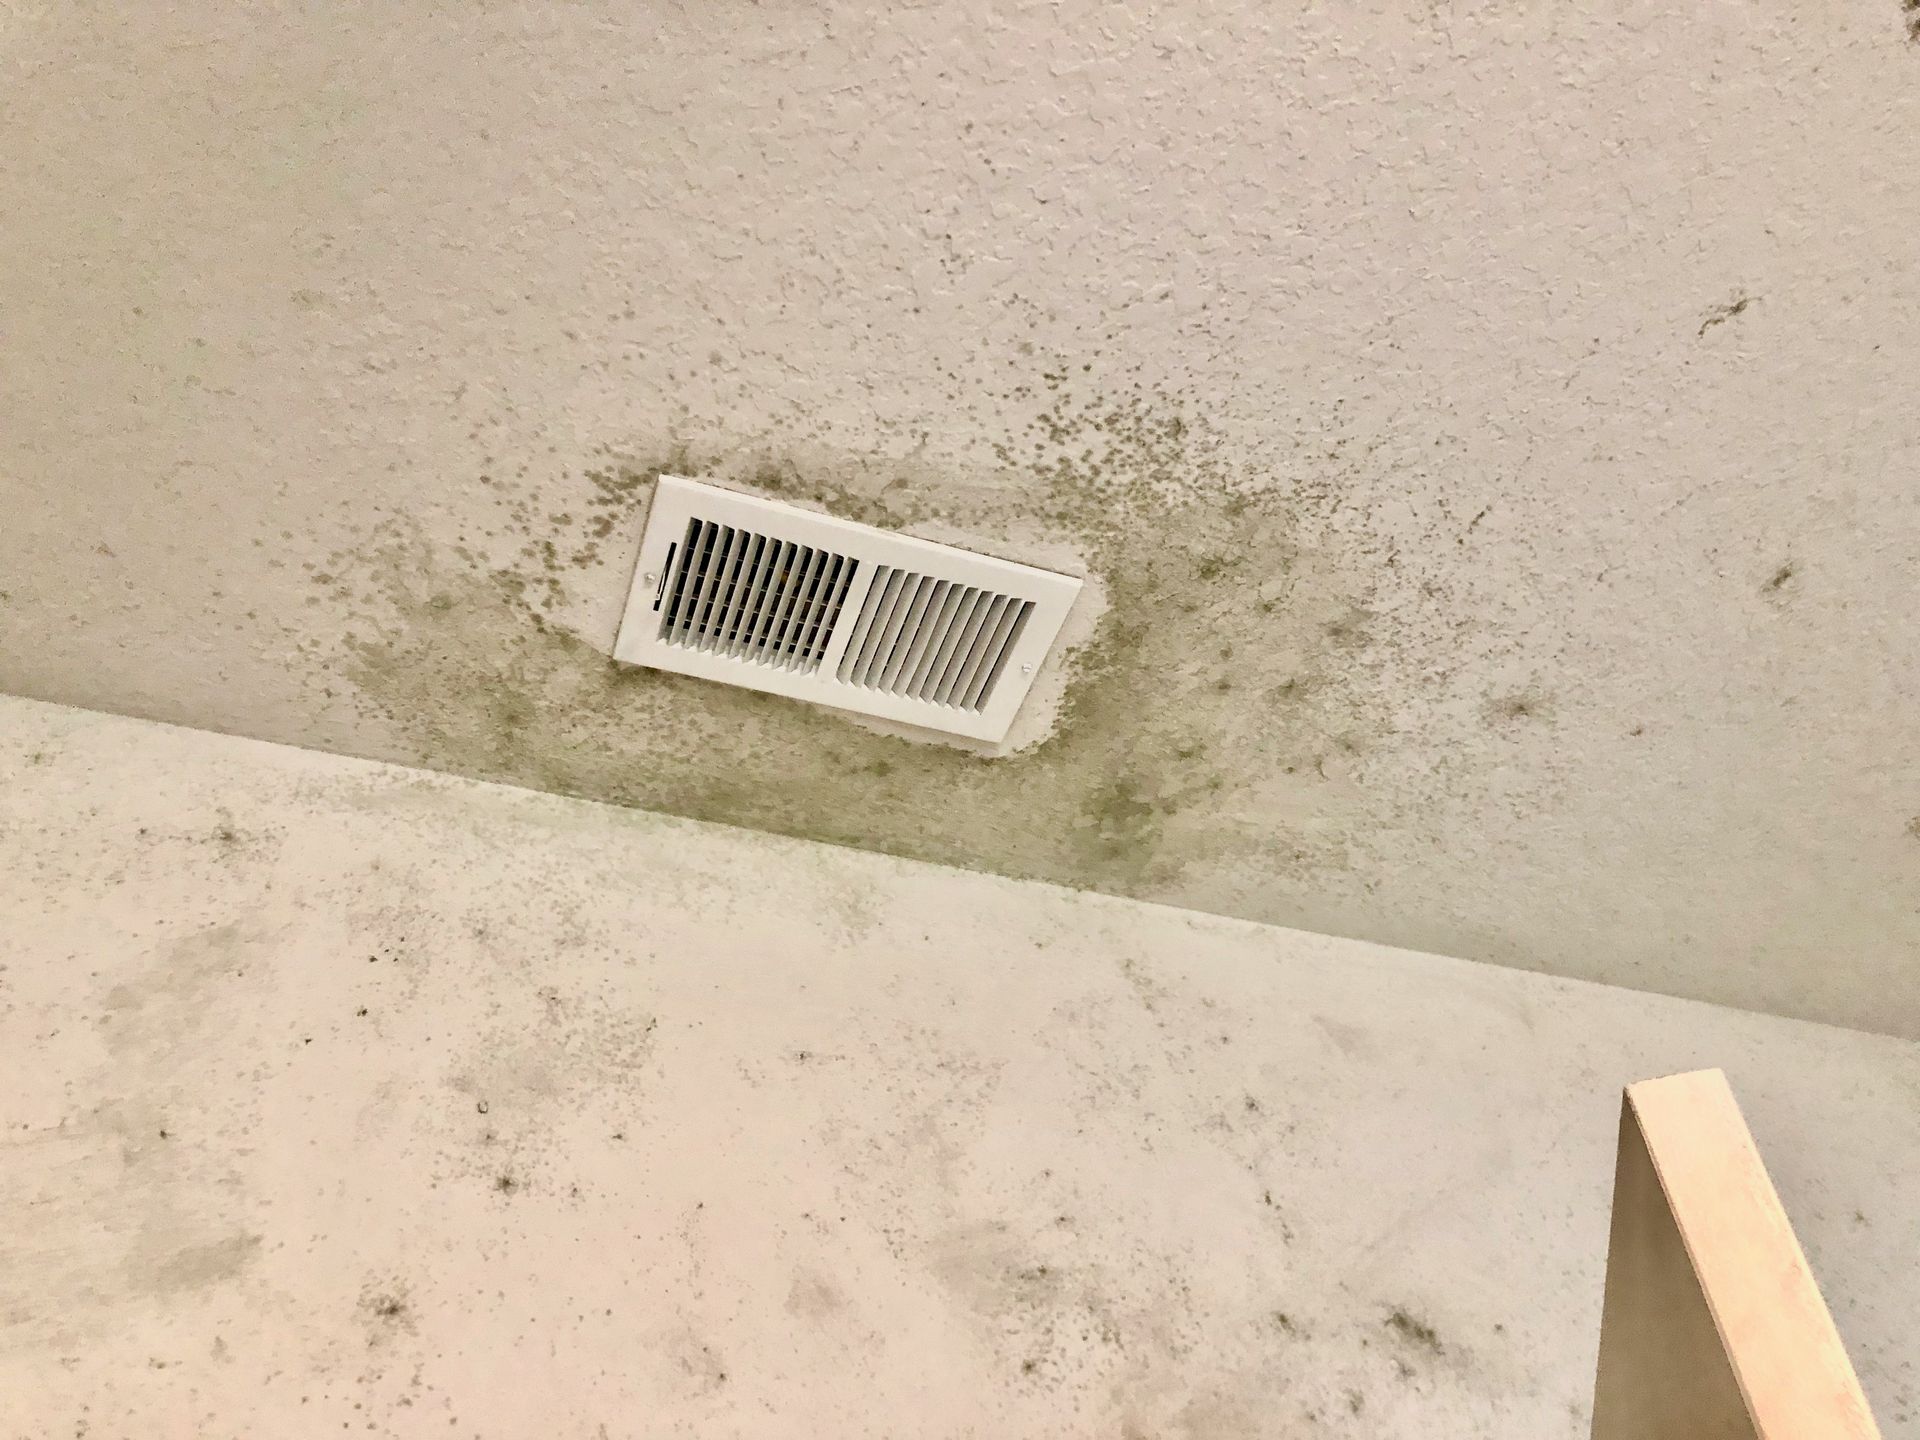 mold in vacation rental, mold in ac, mold on vent, green mold on ceiling